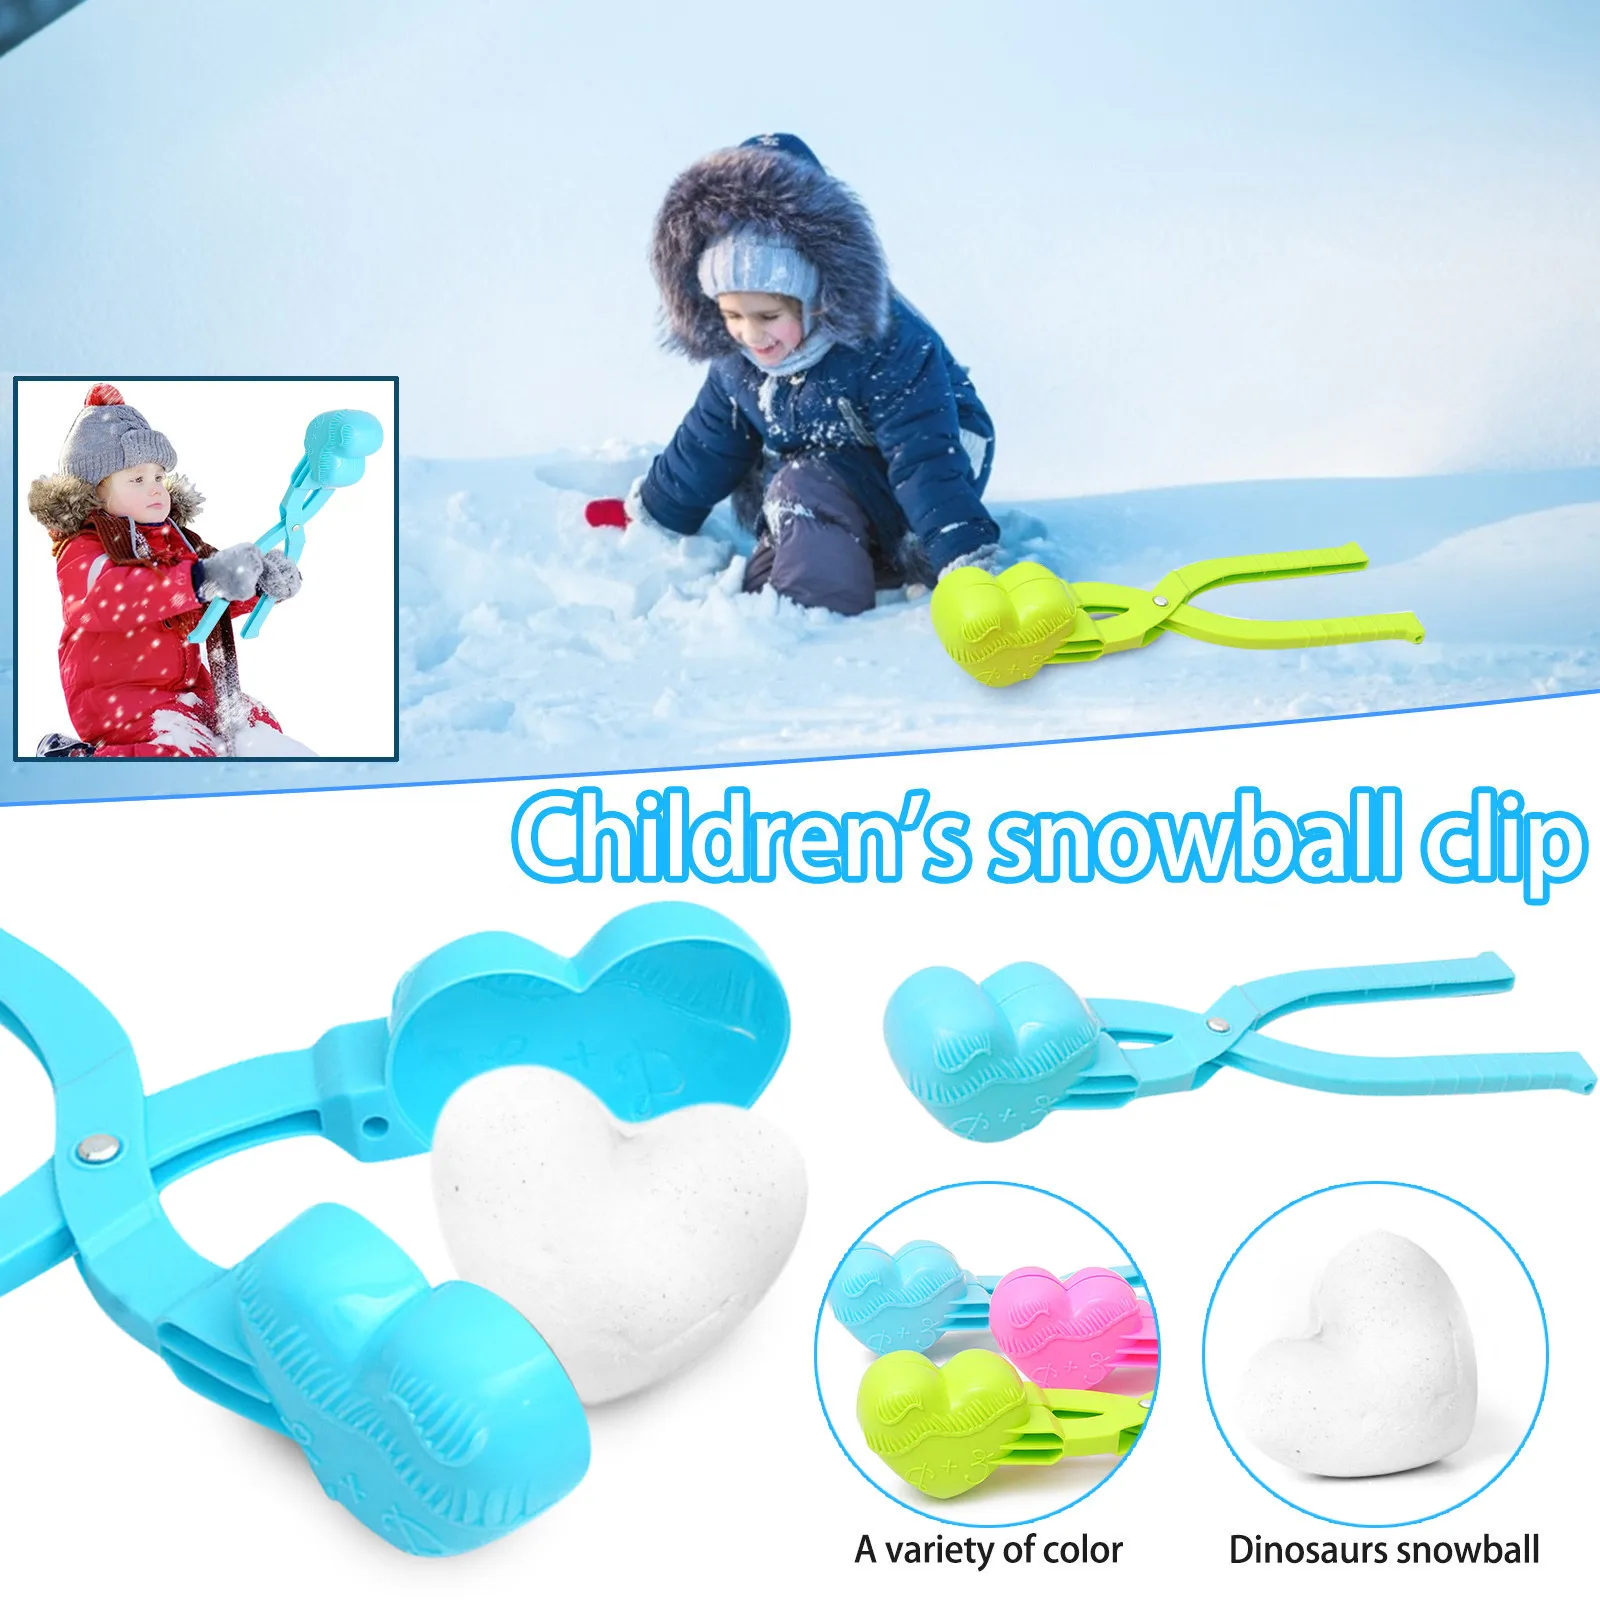 Two Love One-Piece Snow Tongs Snowball Maker Suitable for Children and Adults HheJIshirc Heart-Shaped Snow Mold Fun Tool for Outdoor Snowball Fights in Winter Heart-Shaped Snow Clip with Handle 